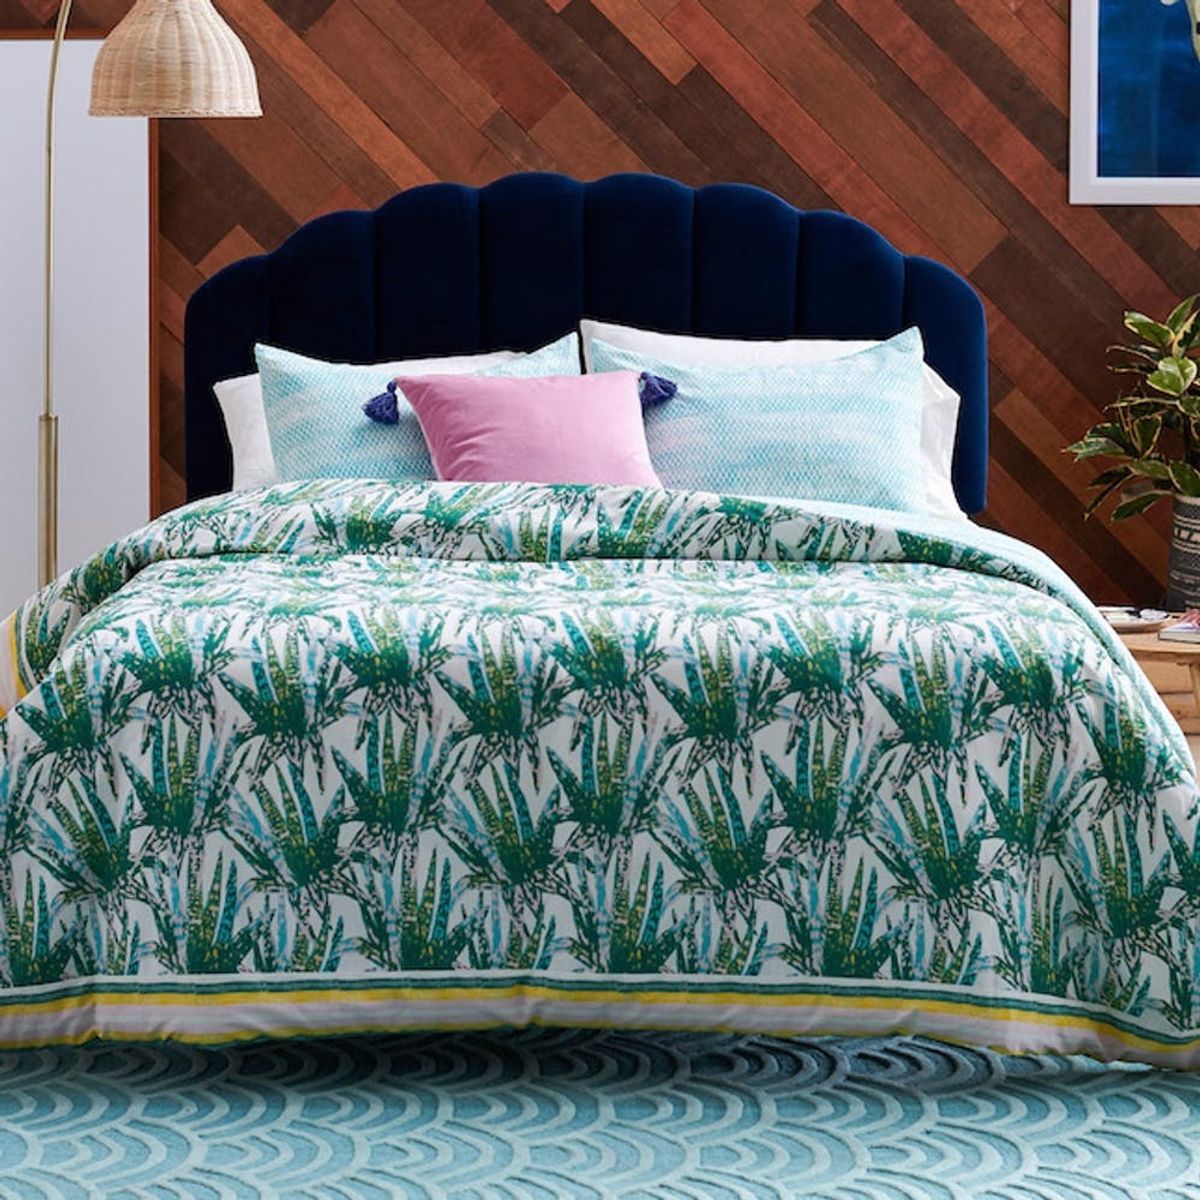 10 Fabulous Bedspreads at Walmart Under $75 That Will Give Your Bedroom a Whole New Look